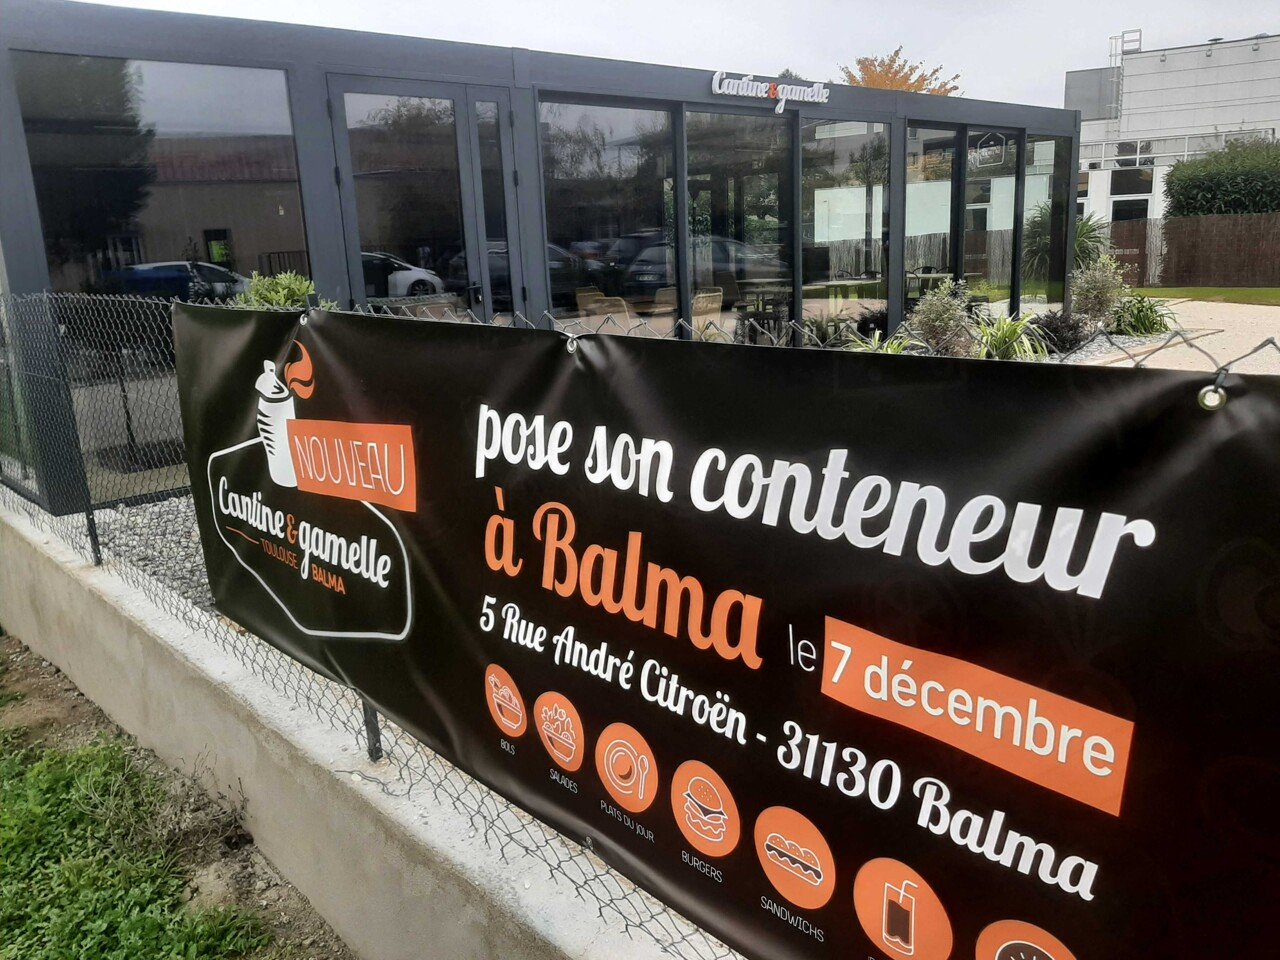 The first Cantine et Gamelle franchise will open on Wednesday 7 December 2022 in Balma.